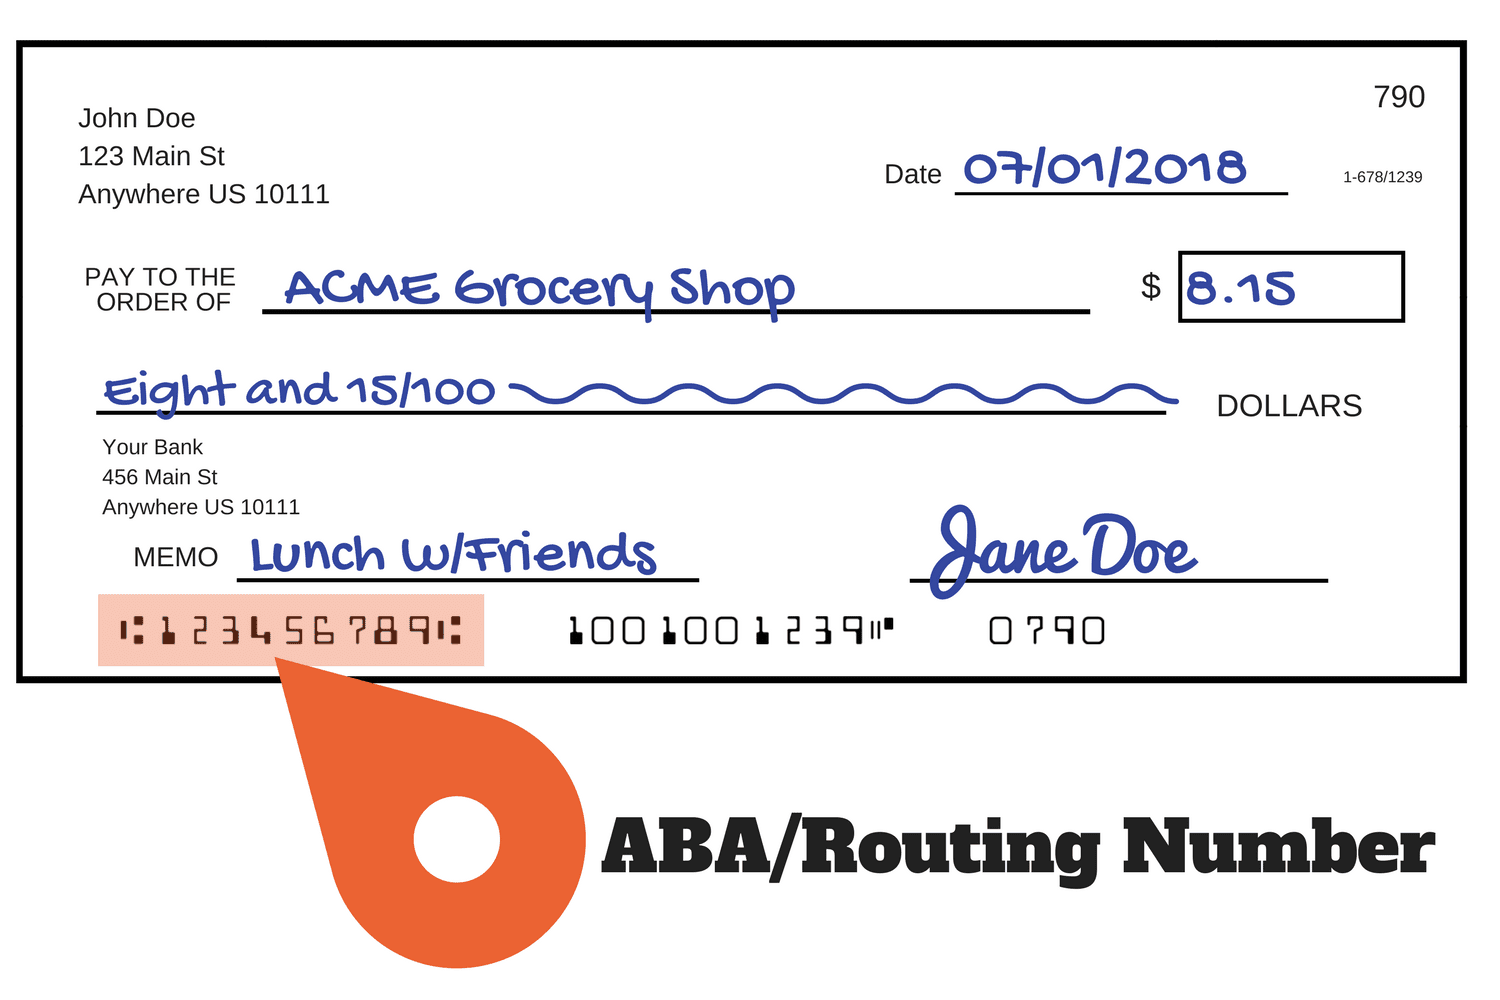 aba numbers: where to find them and how they work